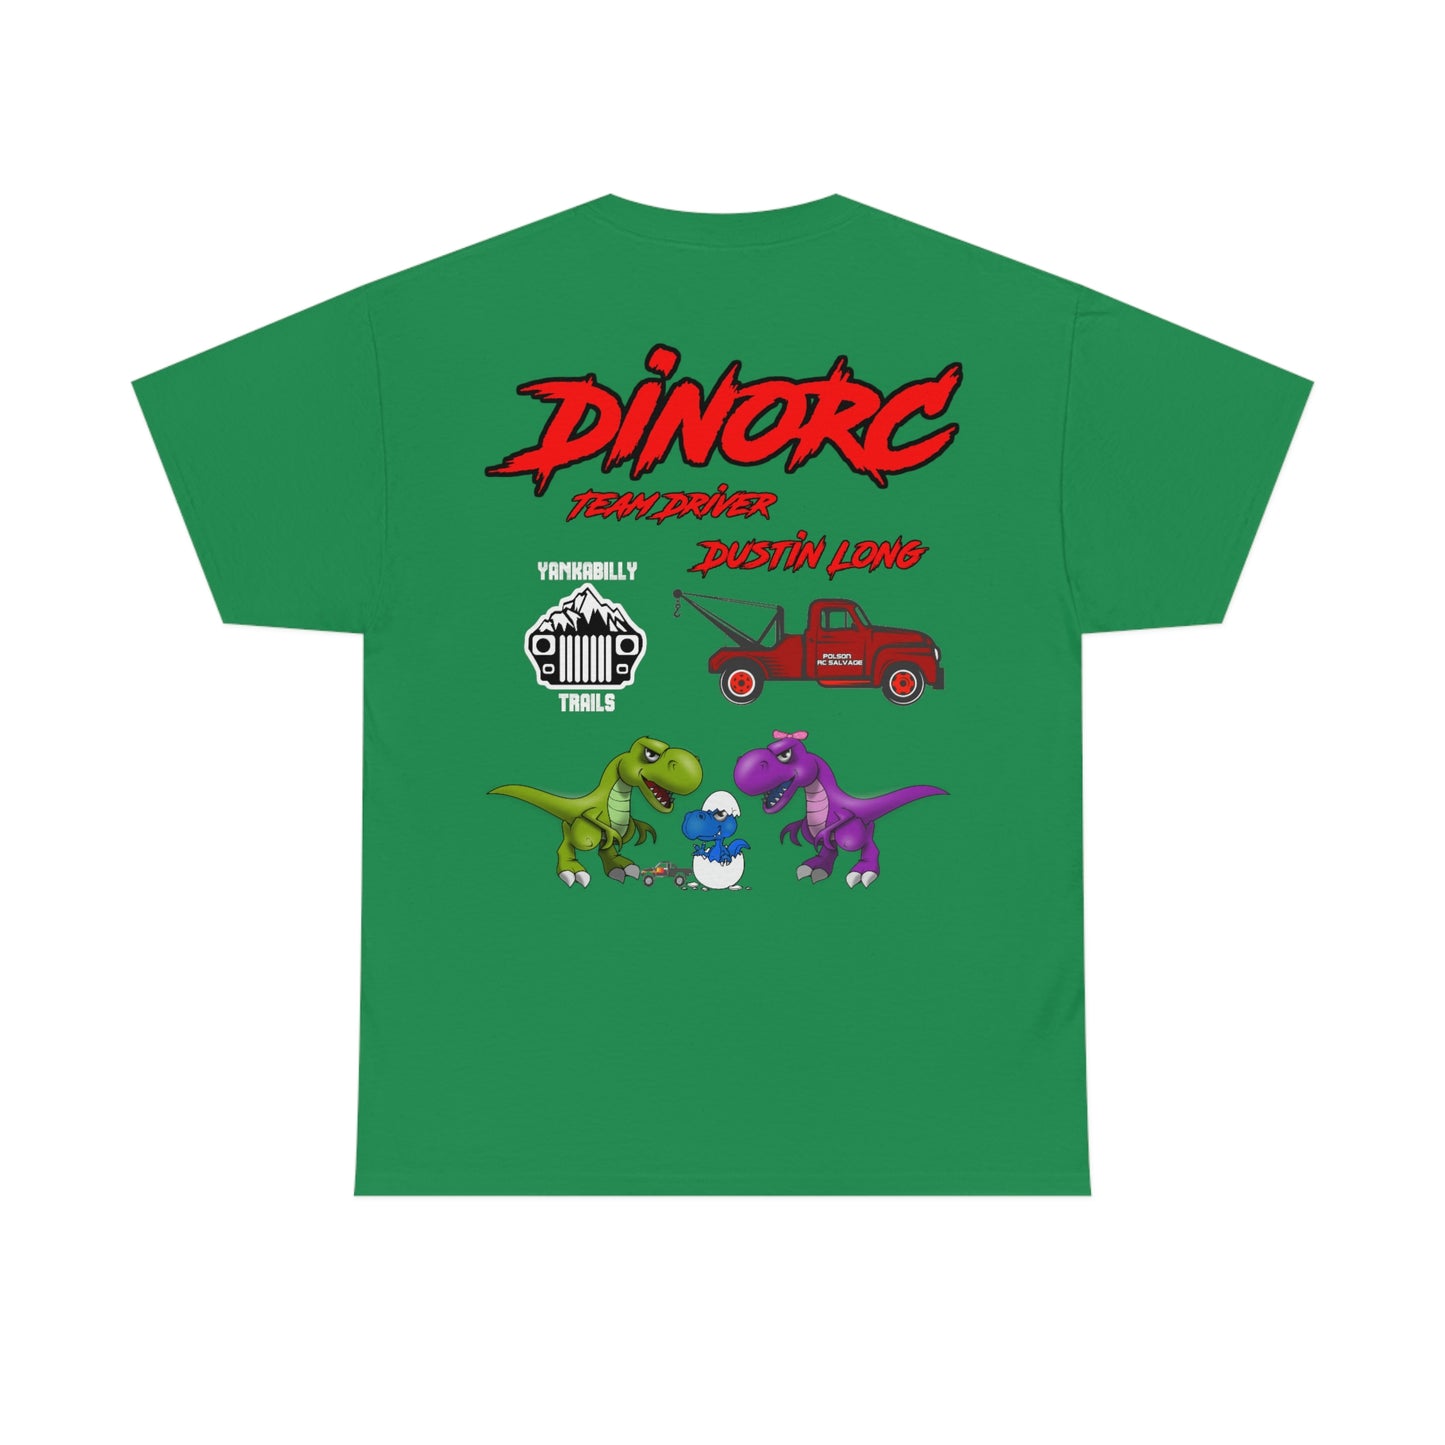 Team Driver Dustin Long  logo Front and Back DinoRc Logo T-Shirt S-5x 5 colors